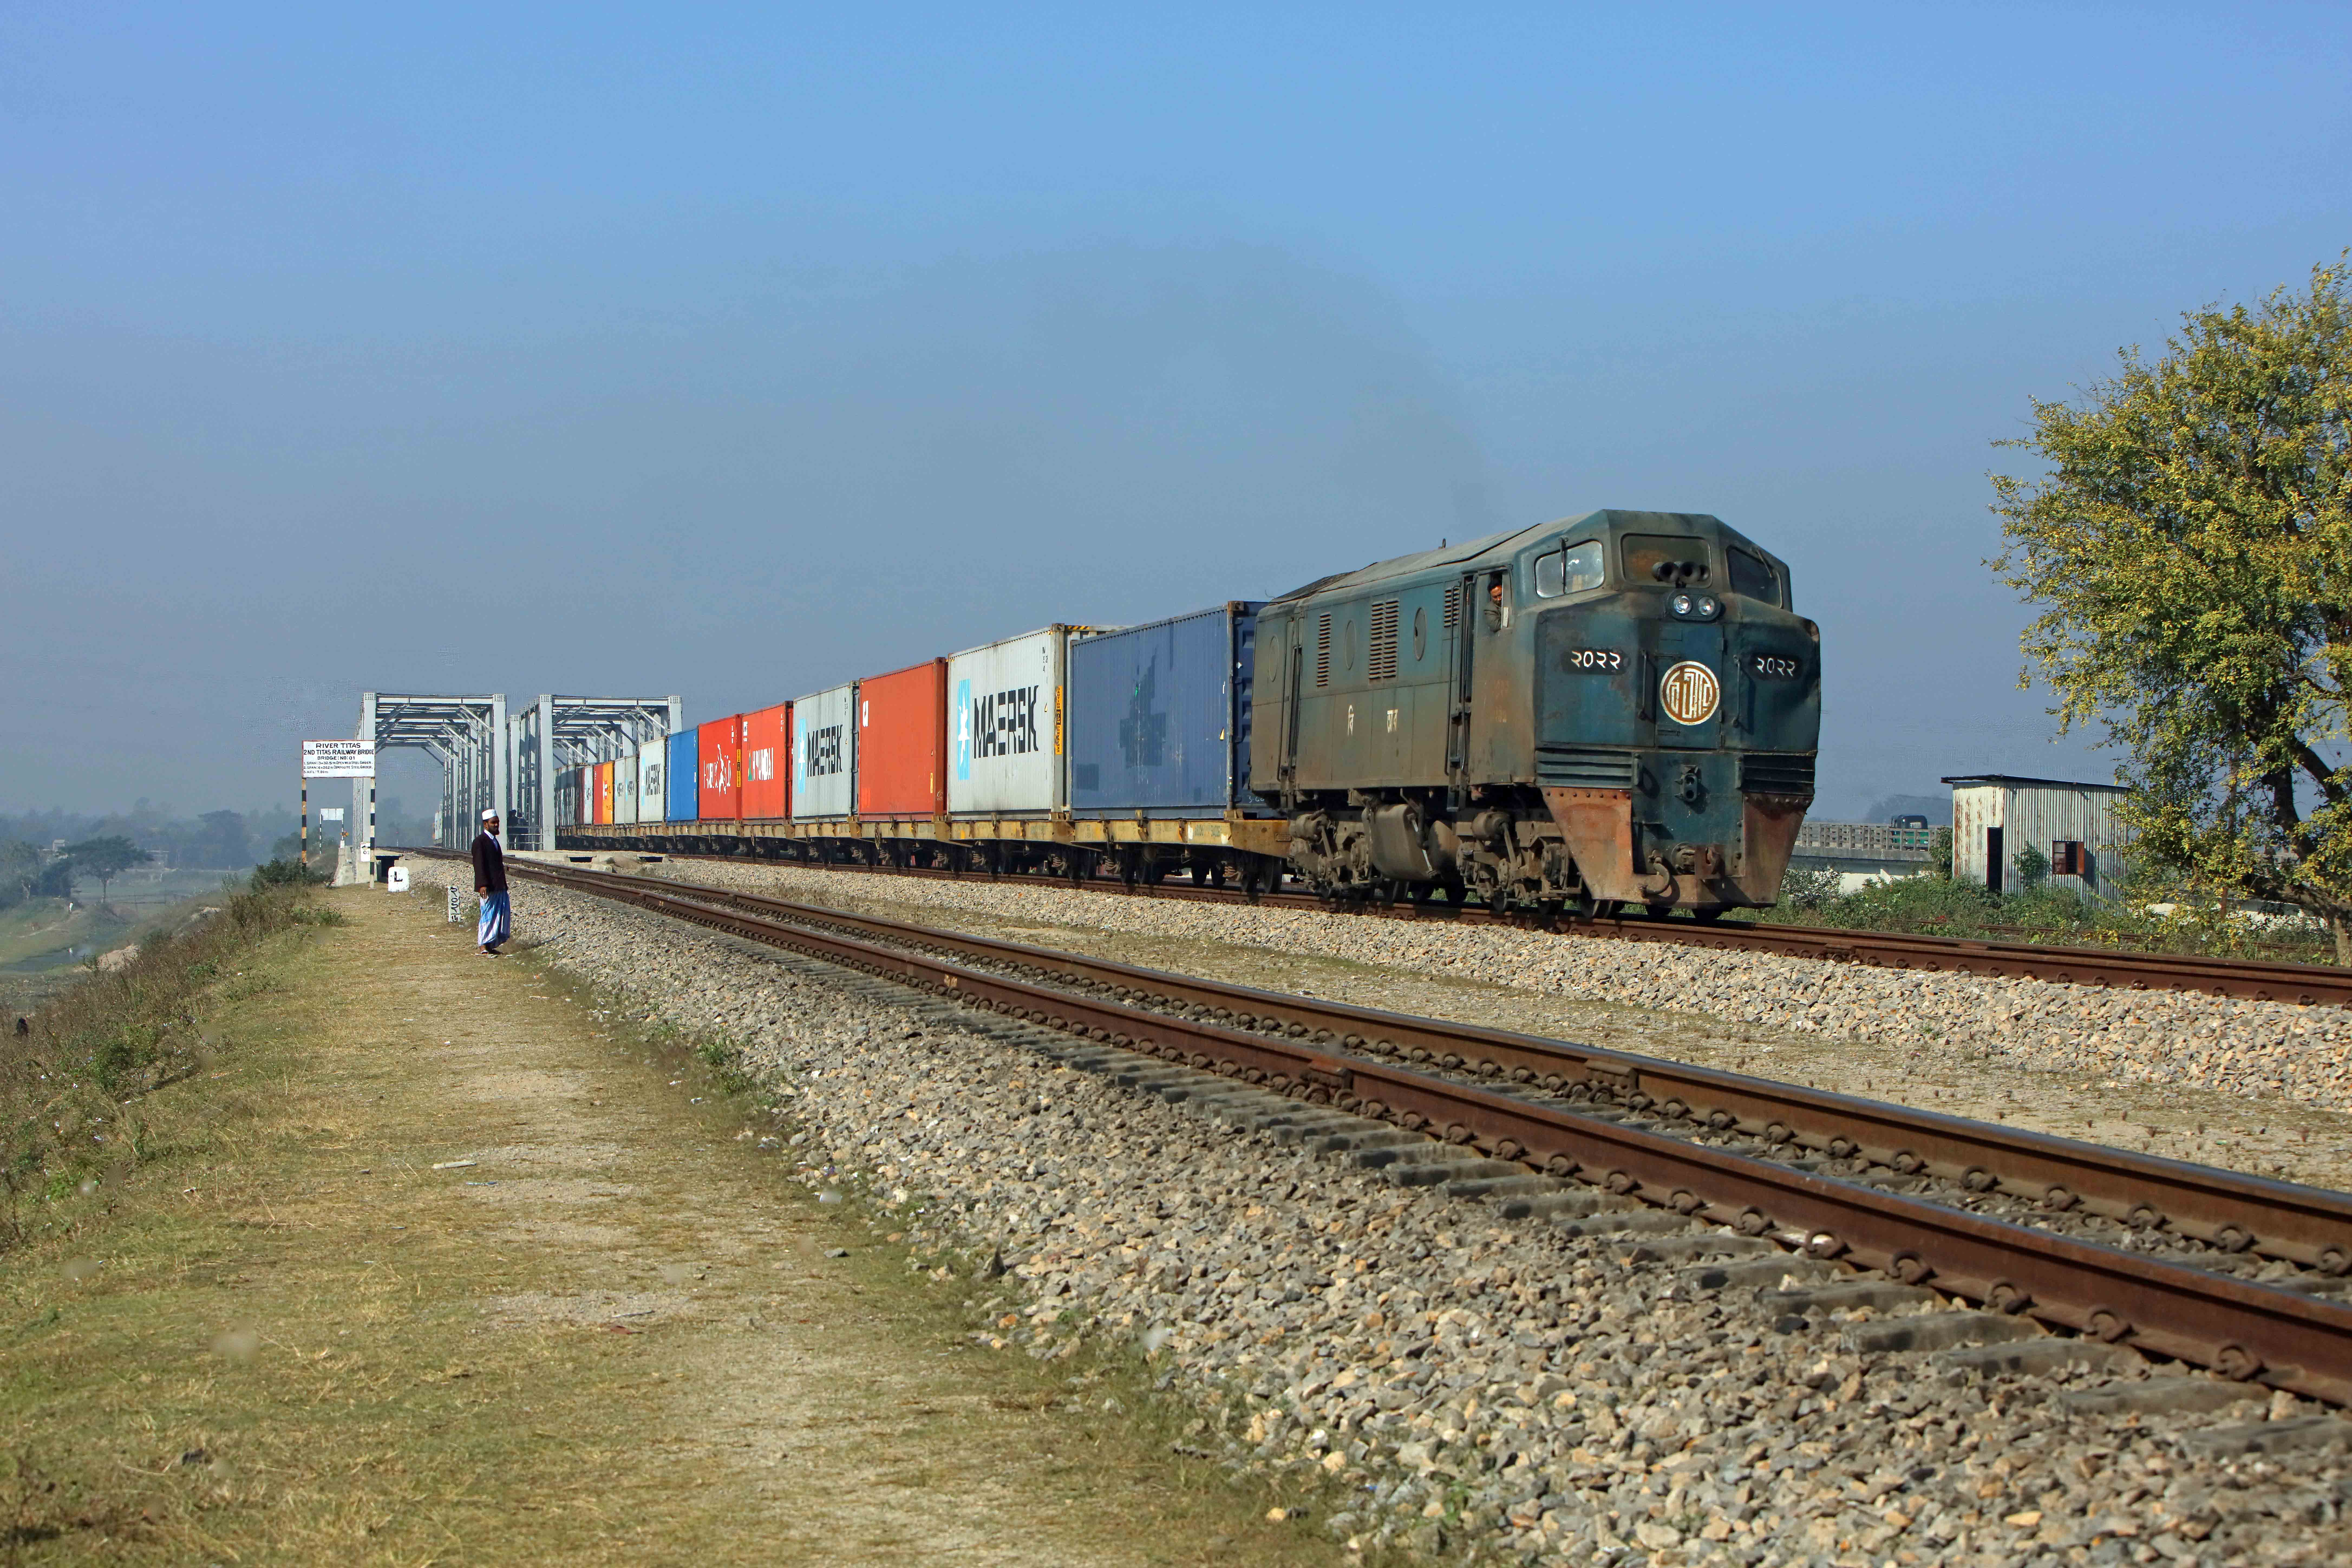 Bangladesh Railways 2022 crosses the Titas River bridge at Akhaura with a container train from Dhaka to Chittagong on 13 January 2019.